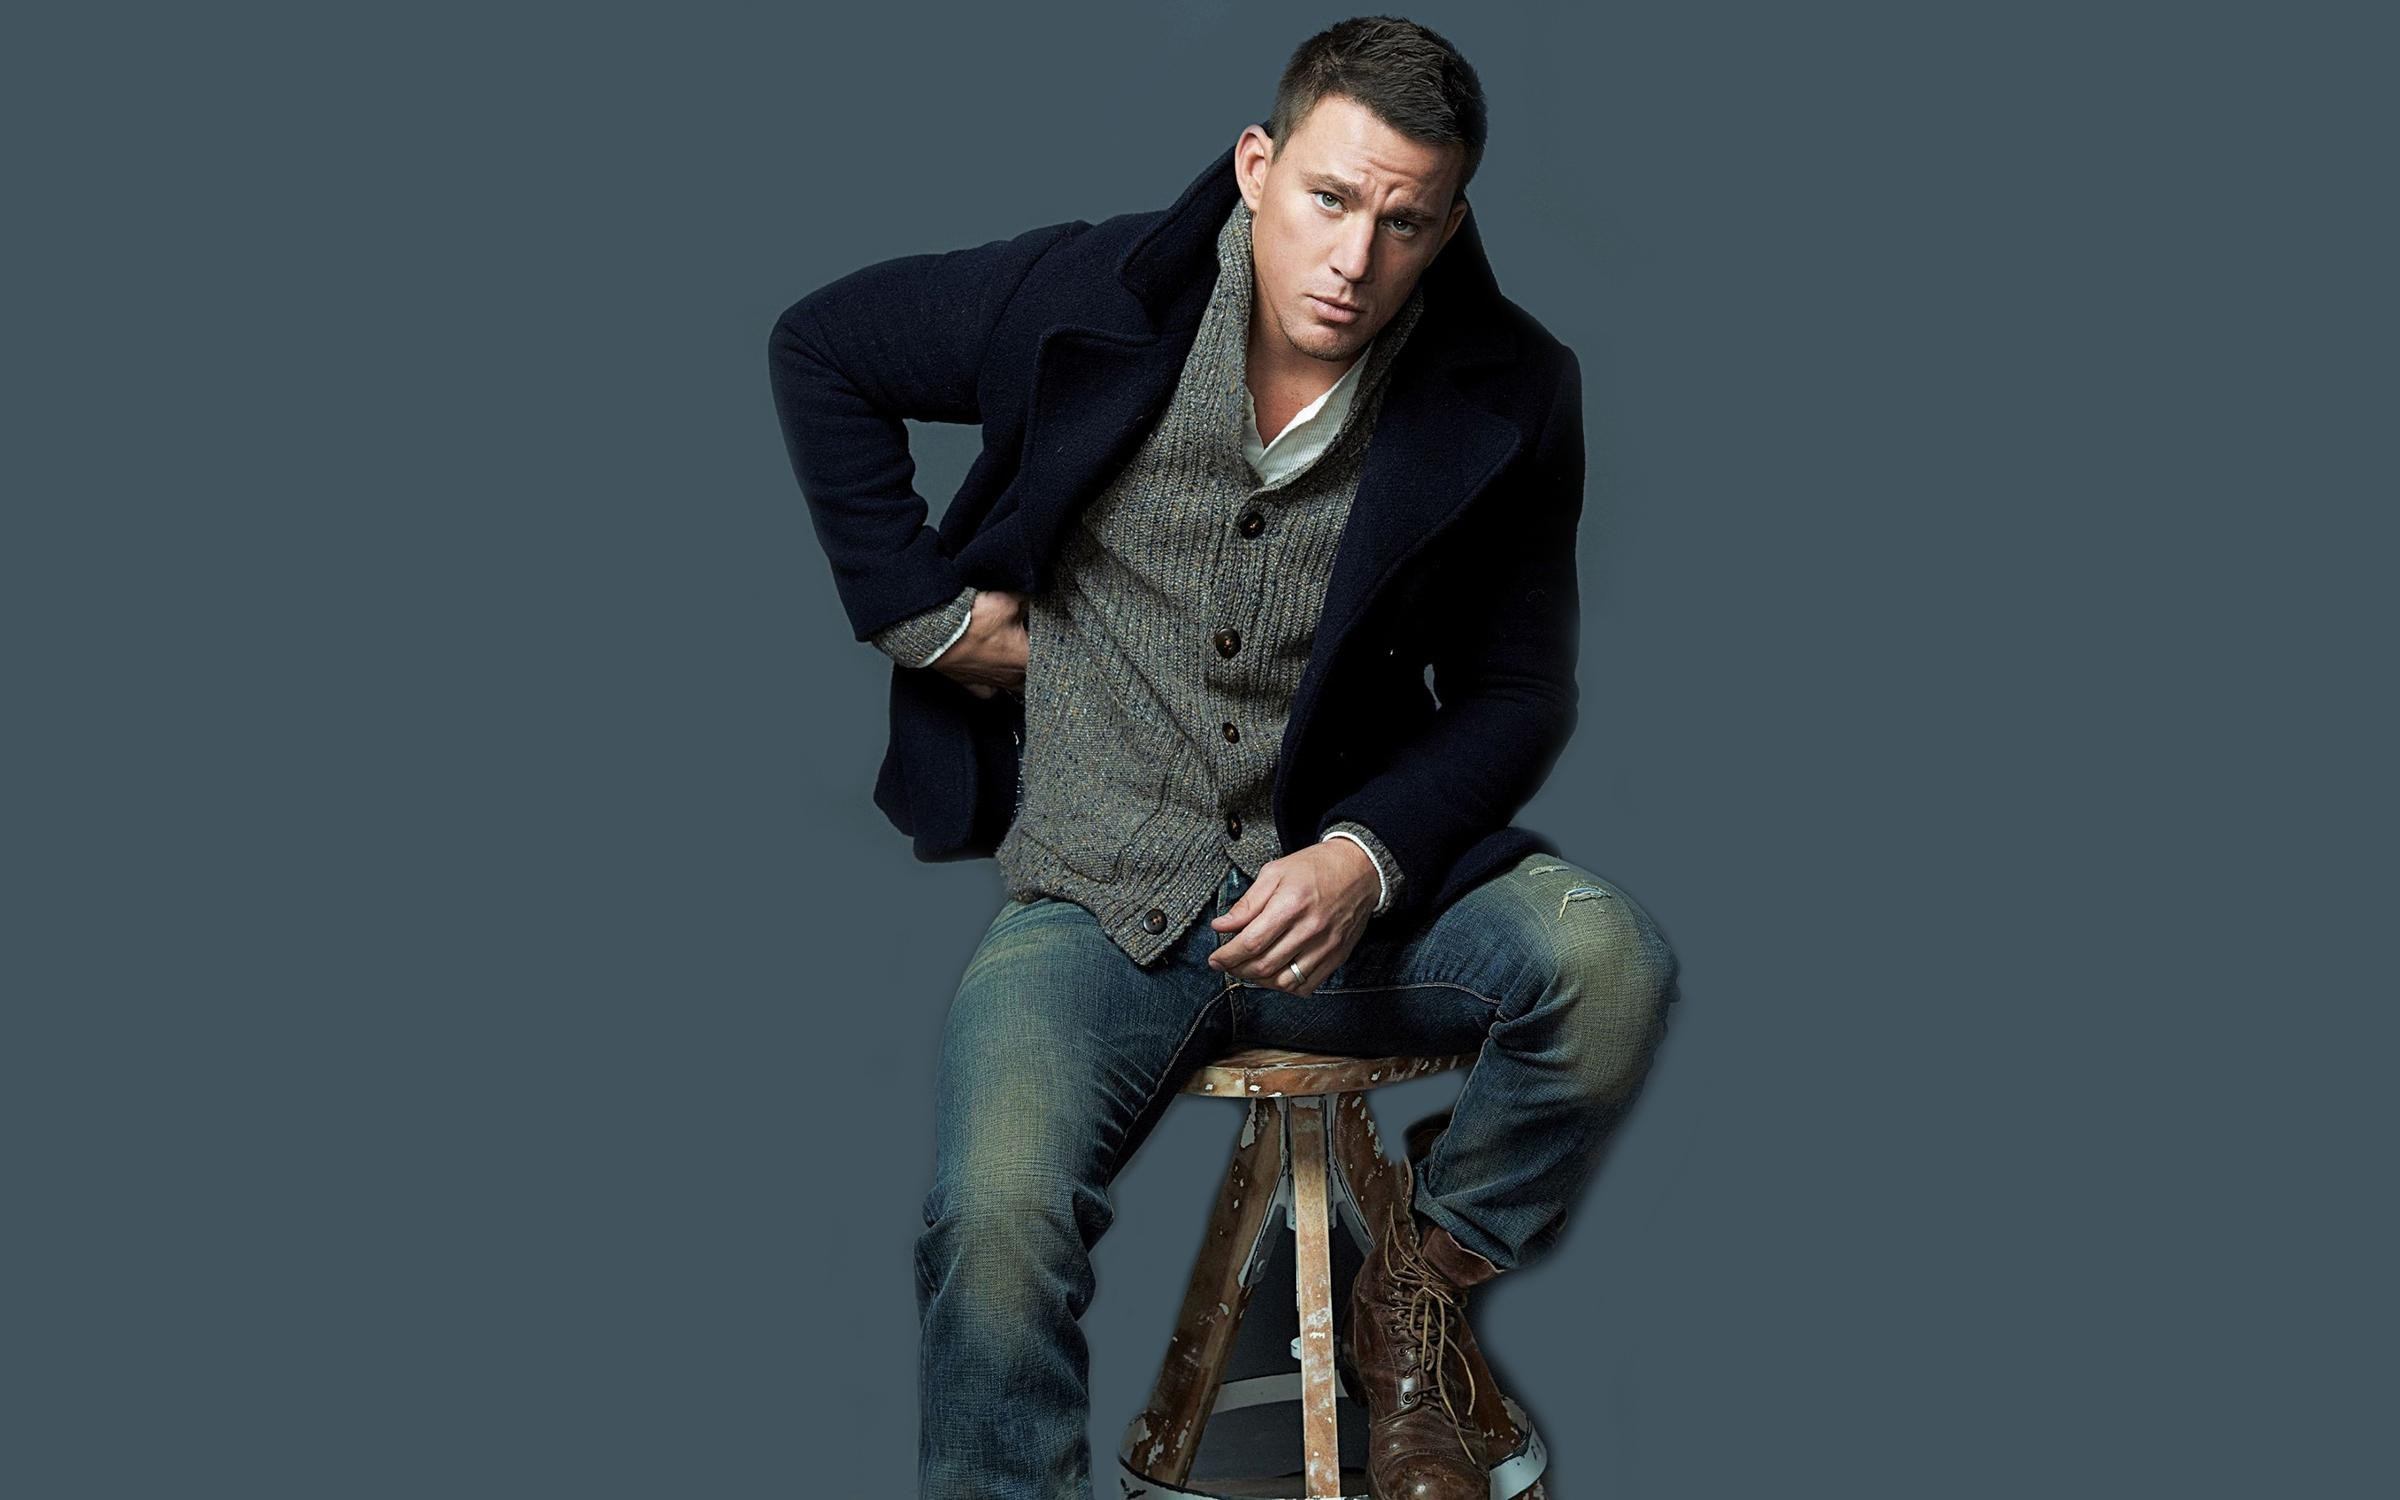 Wallpaper Wiki Channing Tatum Stylish Handsome Hollywood Actor